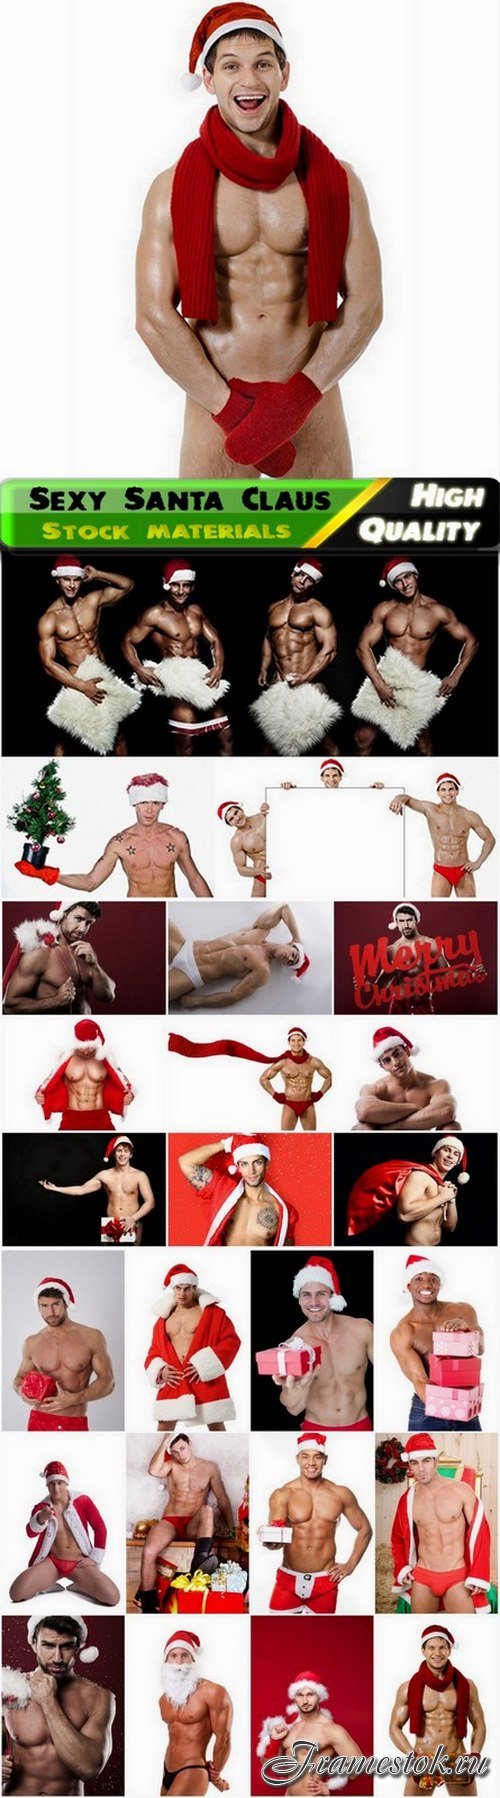 Sexy Santa Claus with presents - 25 HQ Jpg